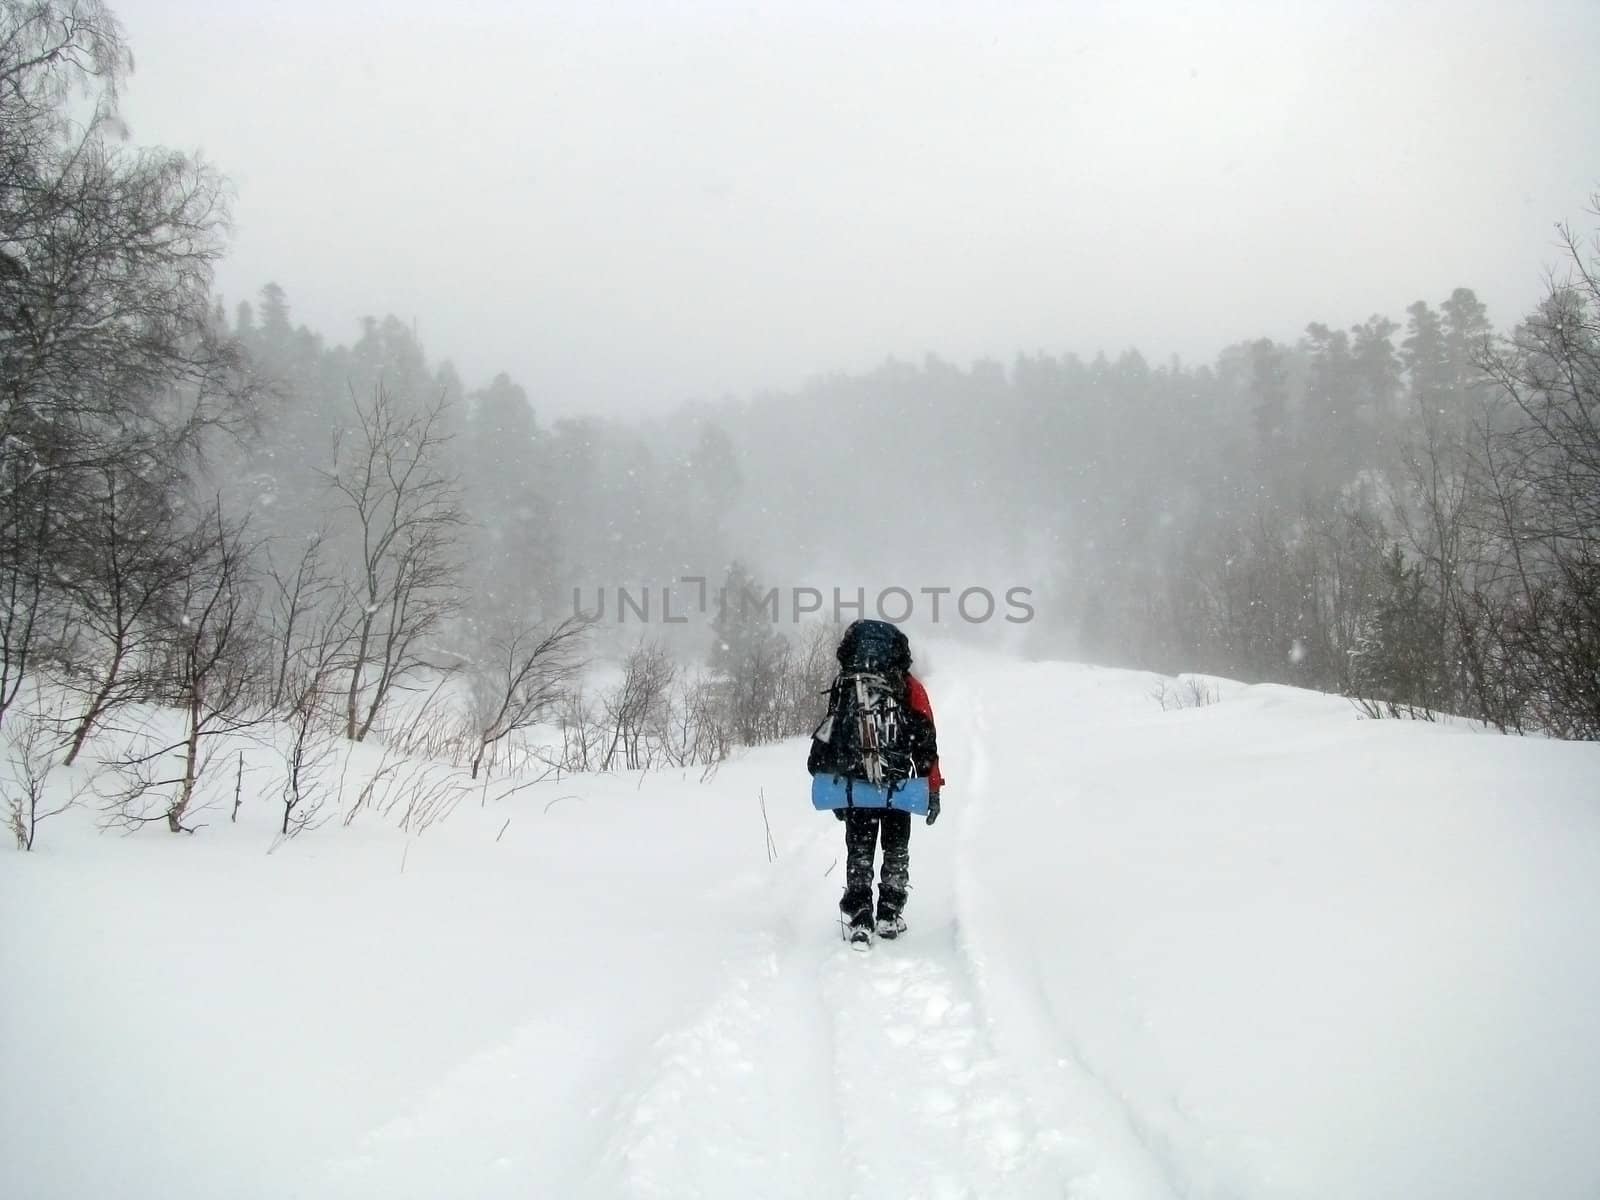 Winter, march, snow, tourist, expedition, snowstorm, extreme, blizzard, is bored, wood,active rest, rucksack, route, bad weather, nature, man, journey